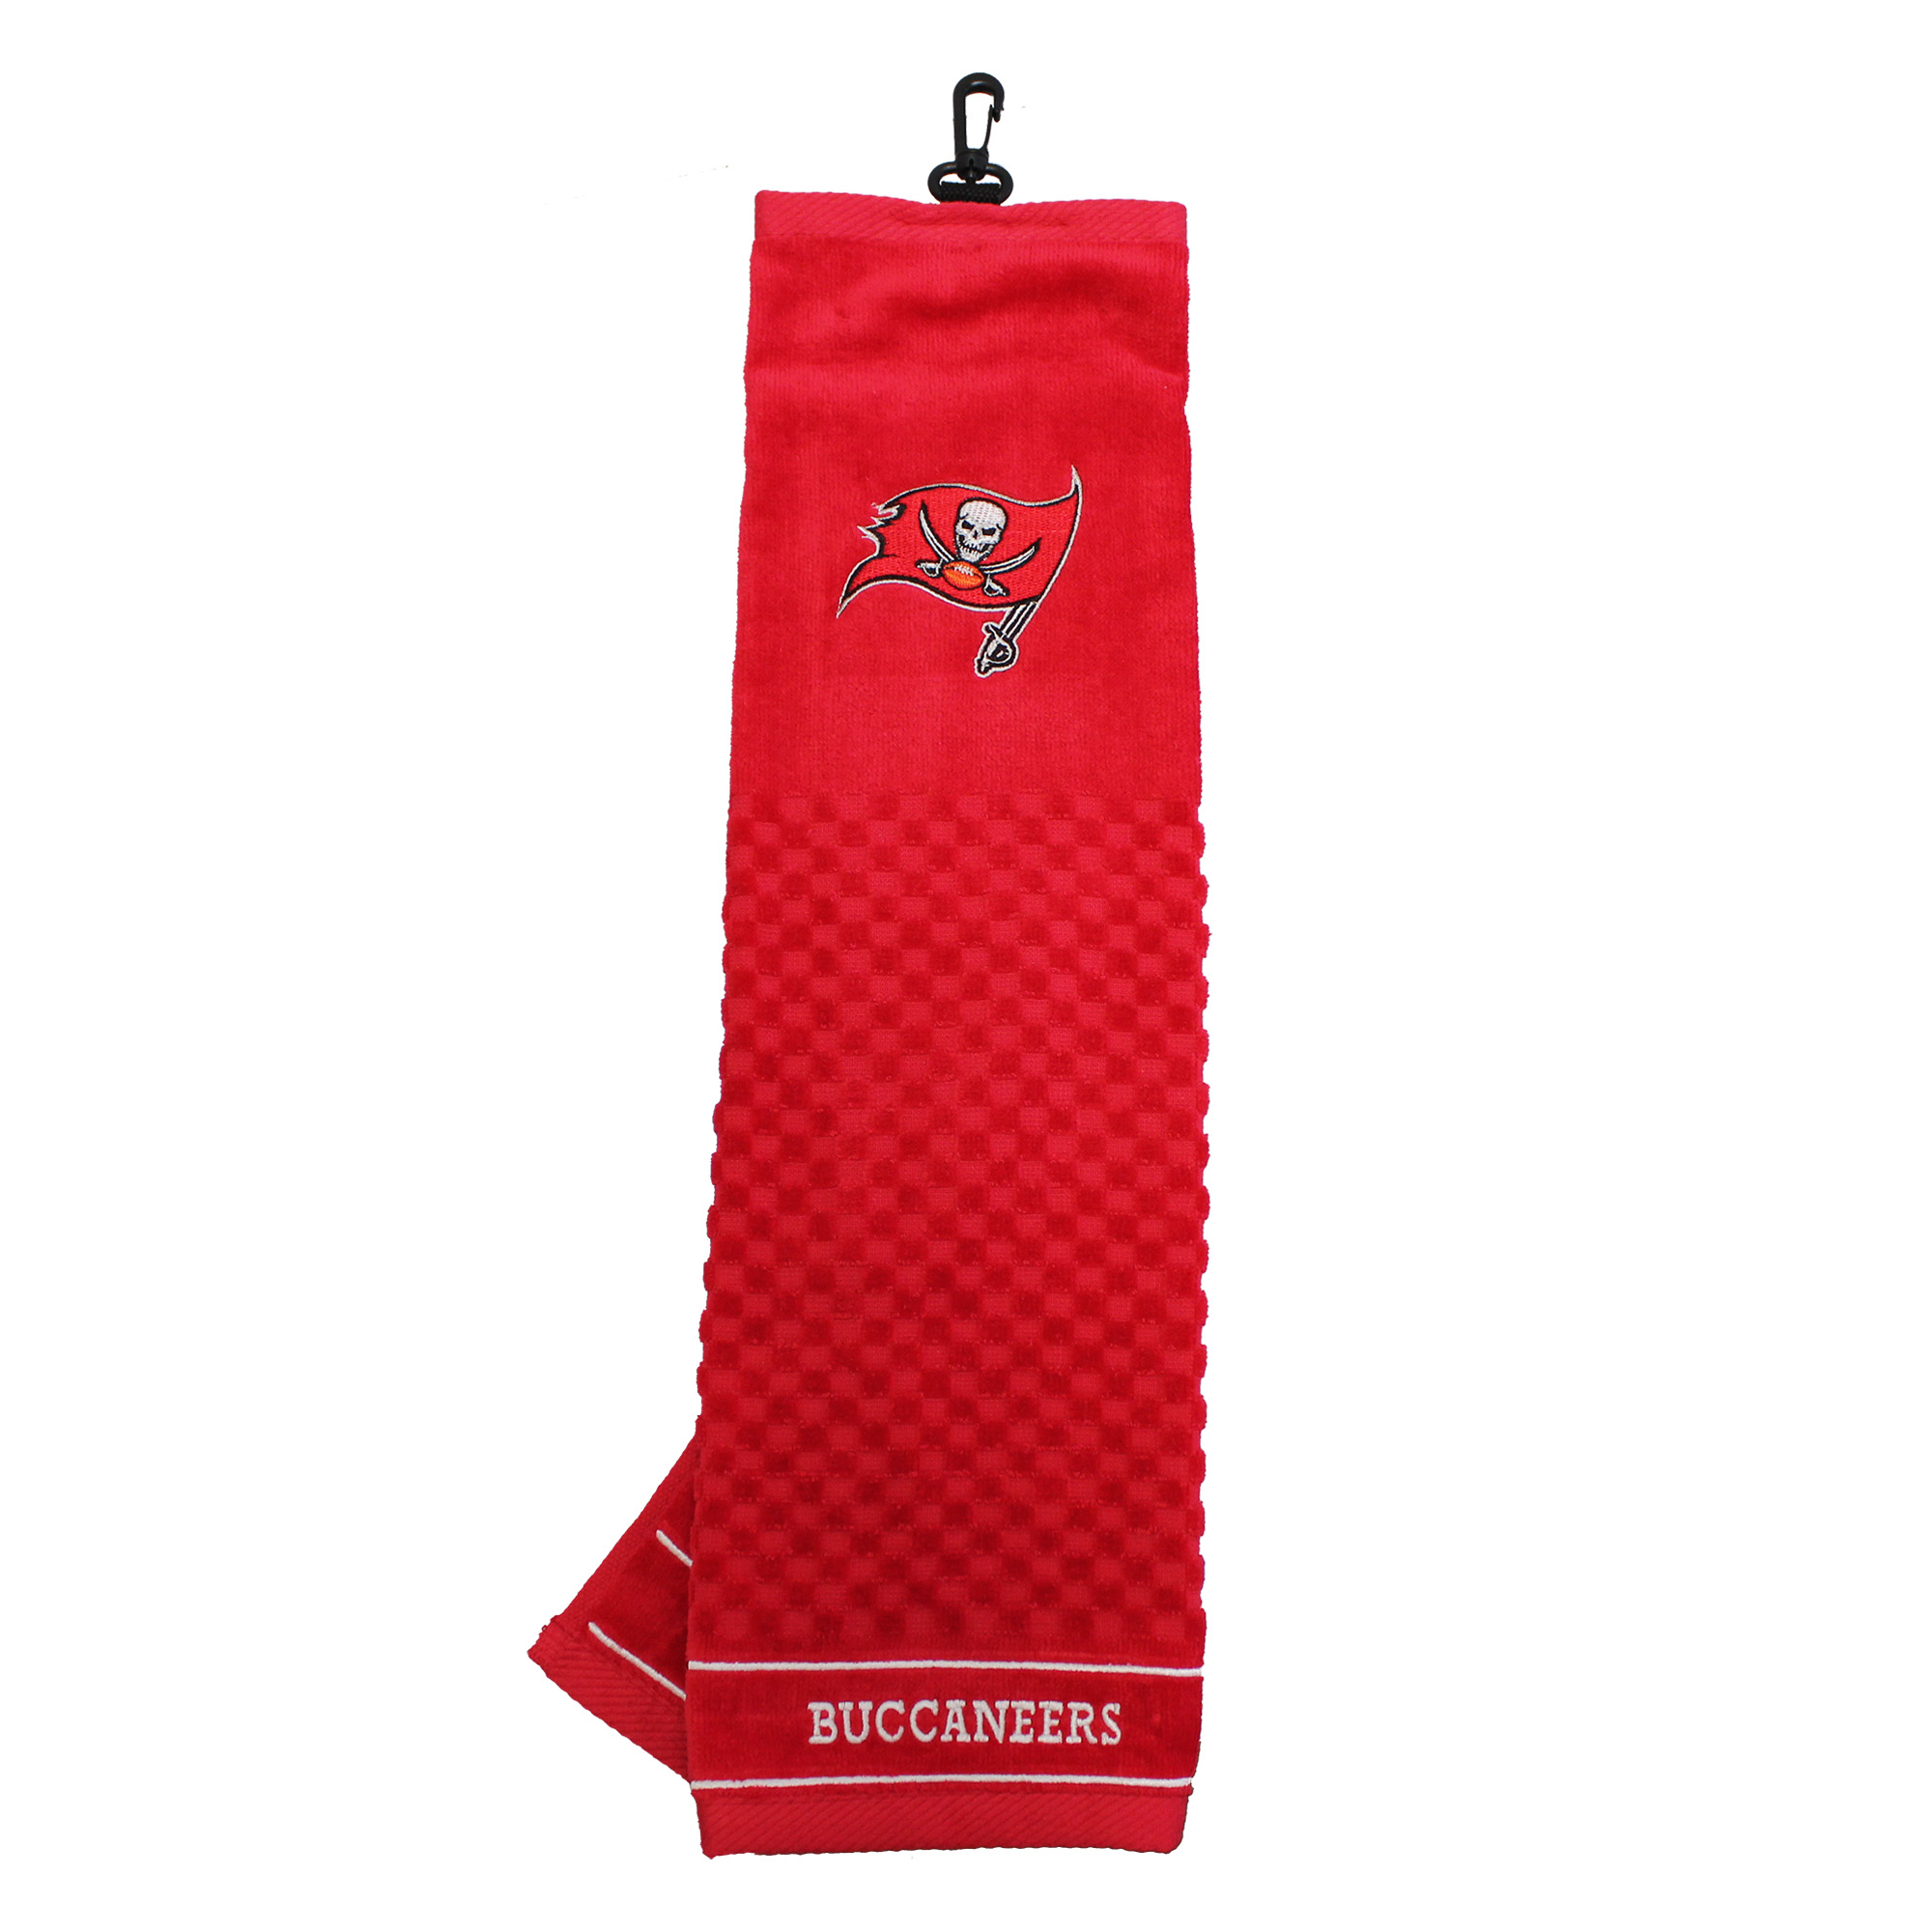 Tampa Bay Buccaneers Embroidered Towel